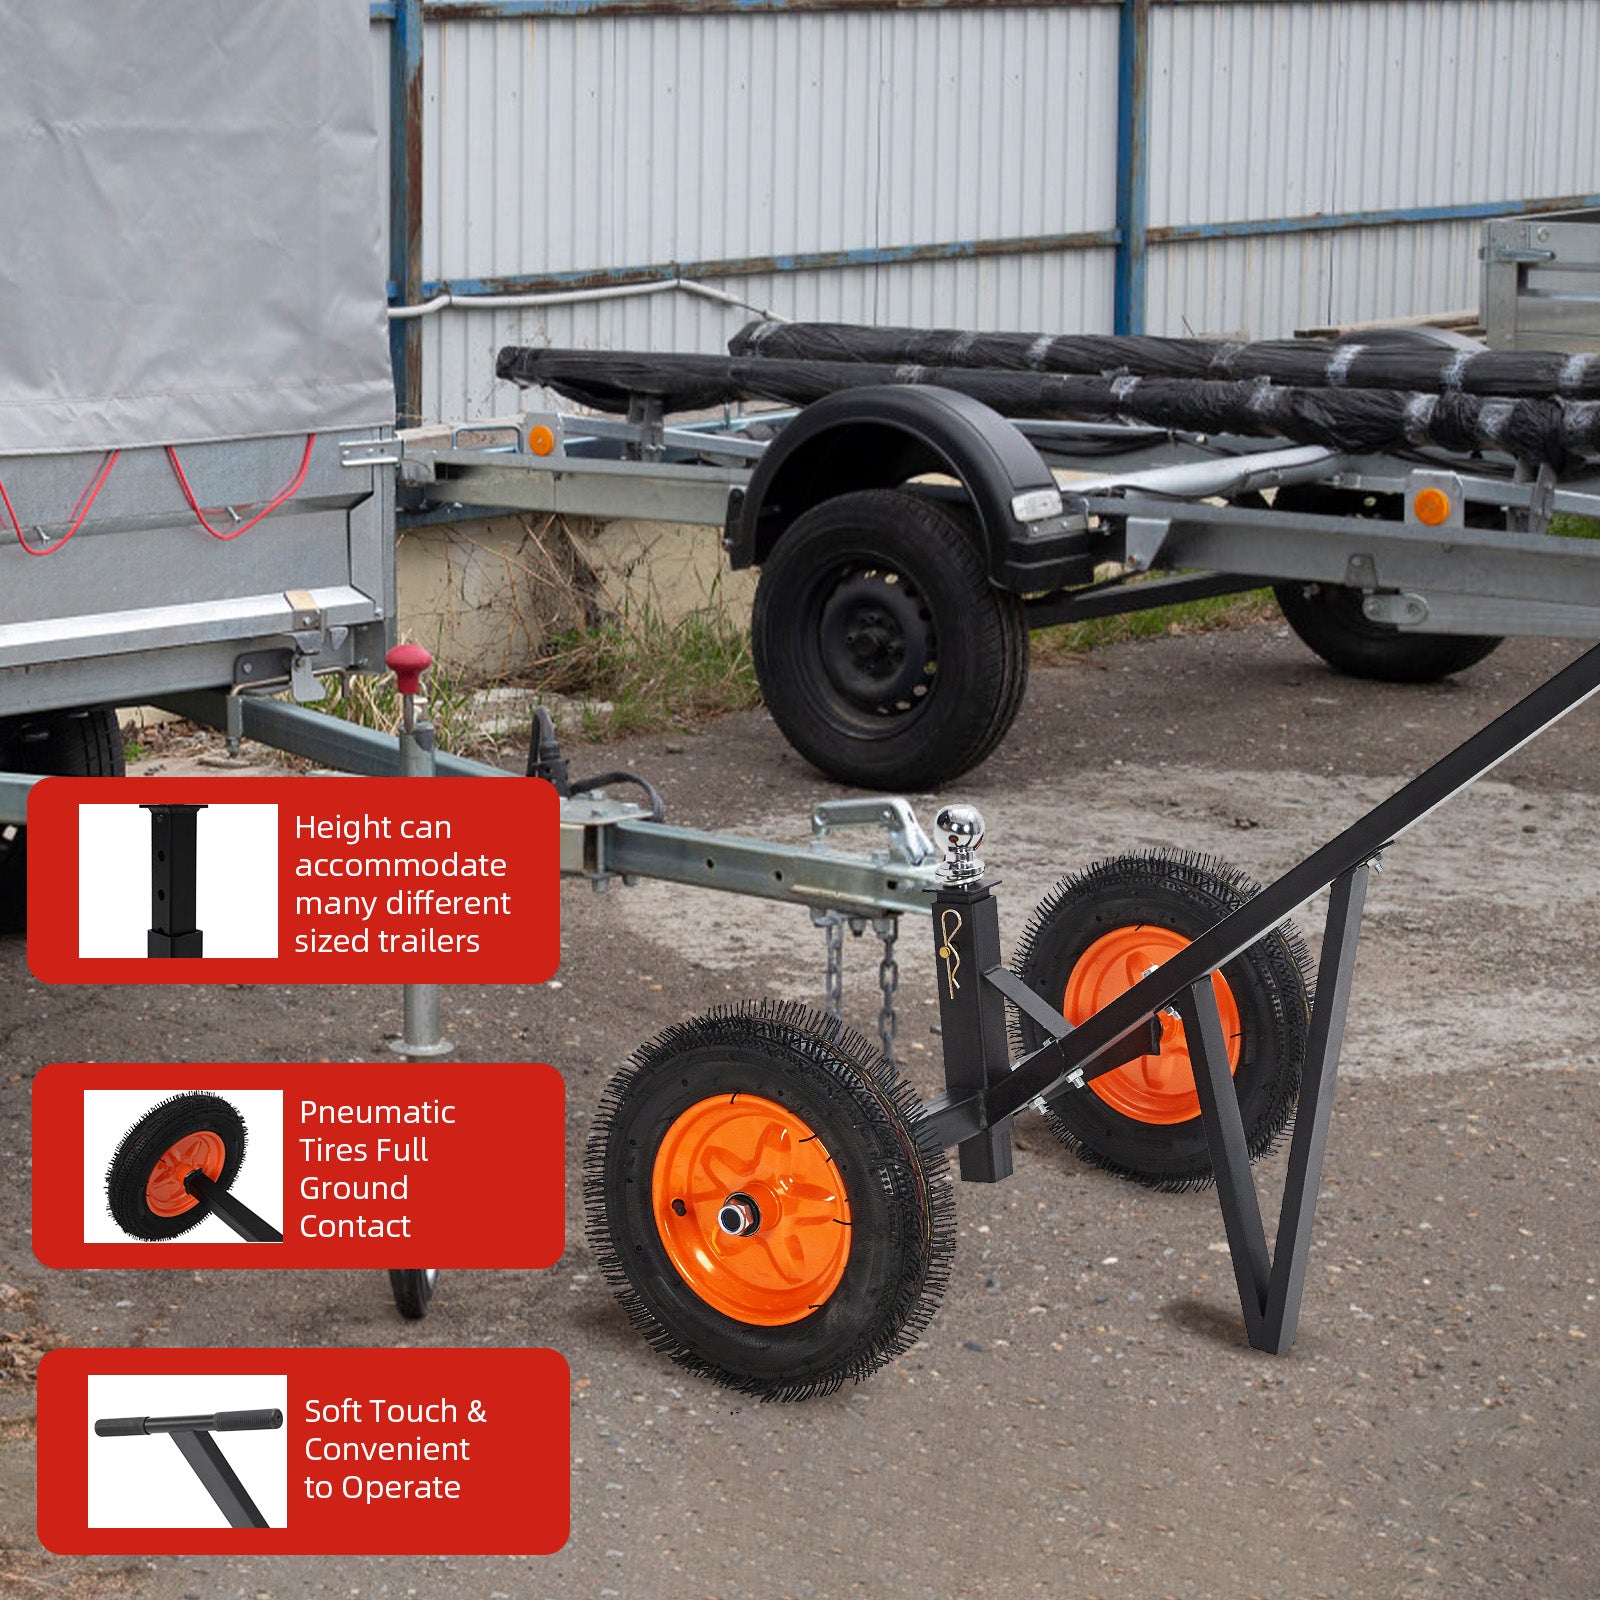 Adjustable 15.7"-23.6" Trailer Dolly - Move Boats, RVs Easily